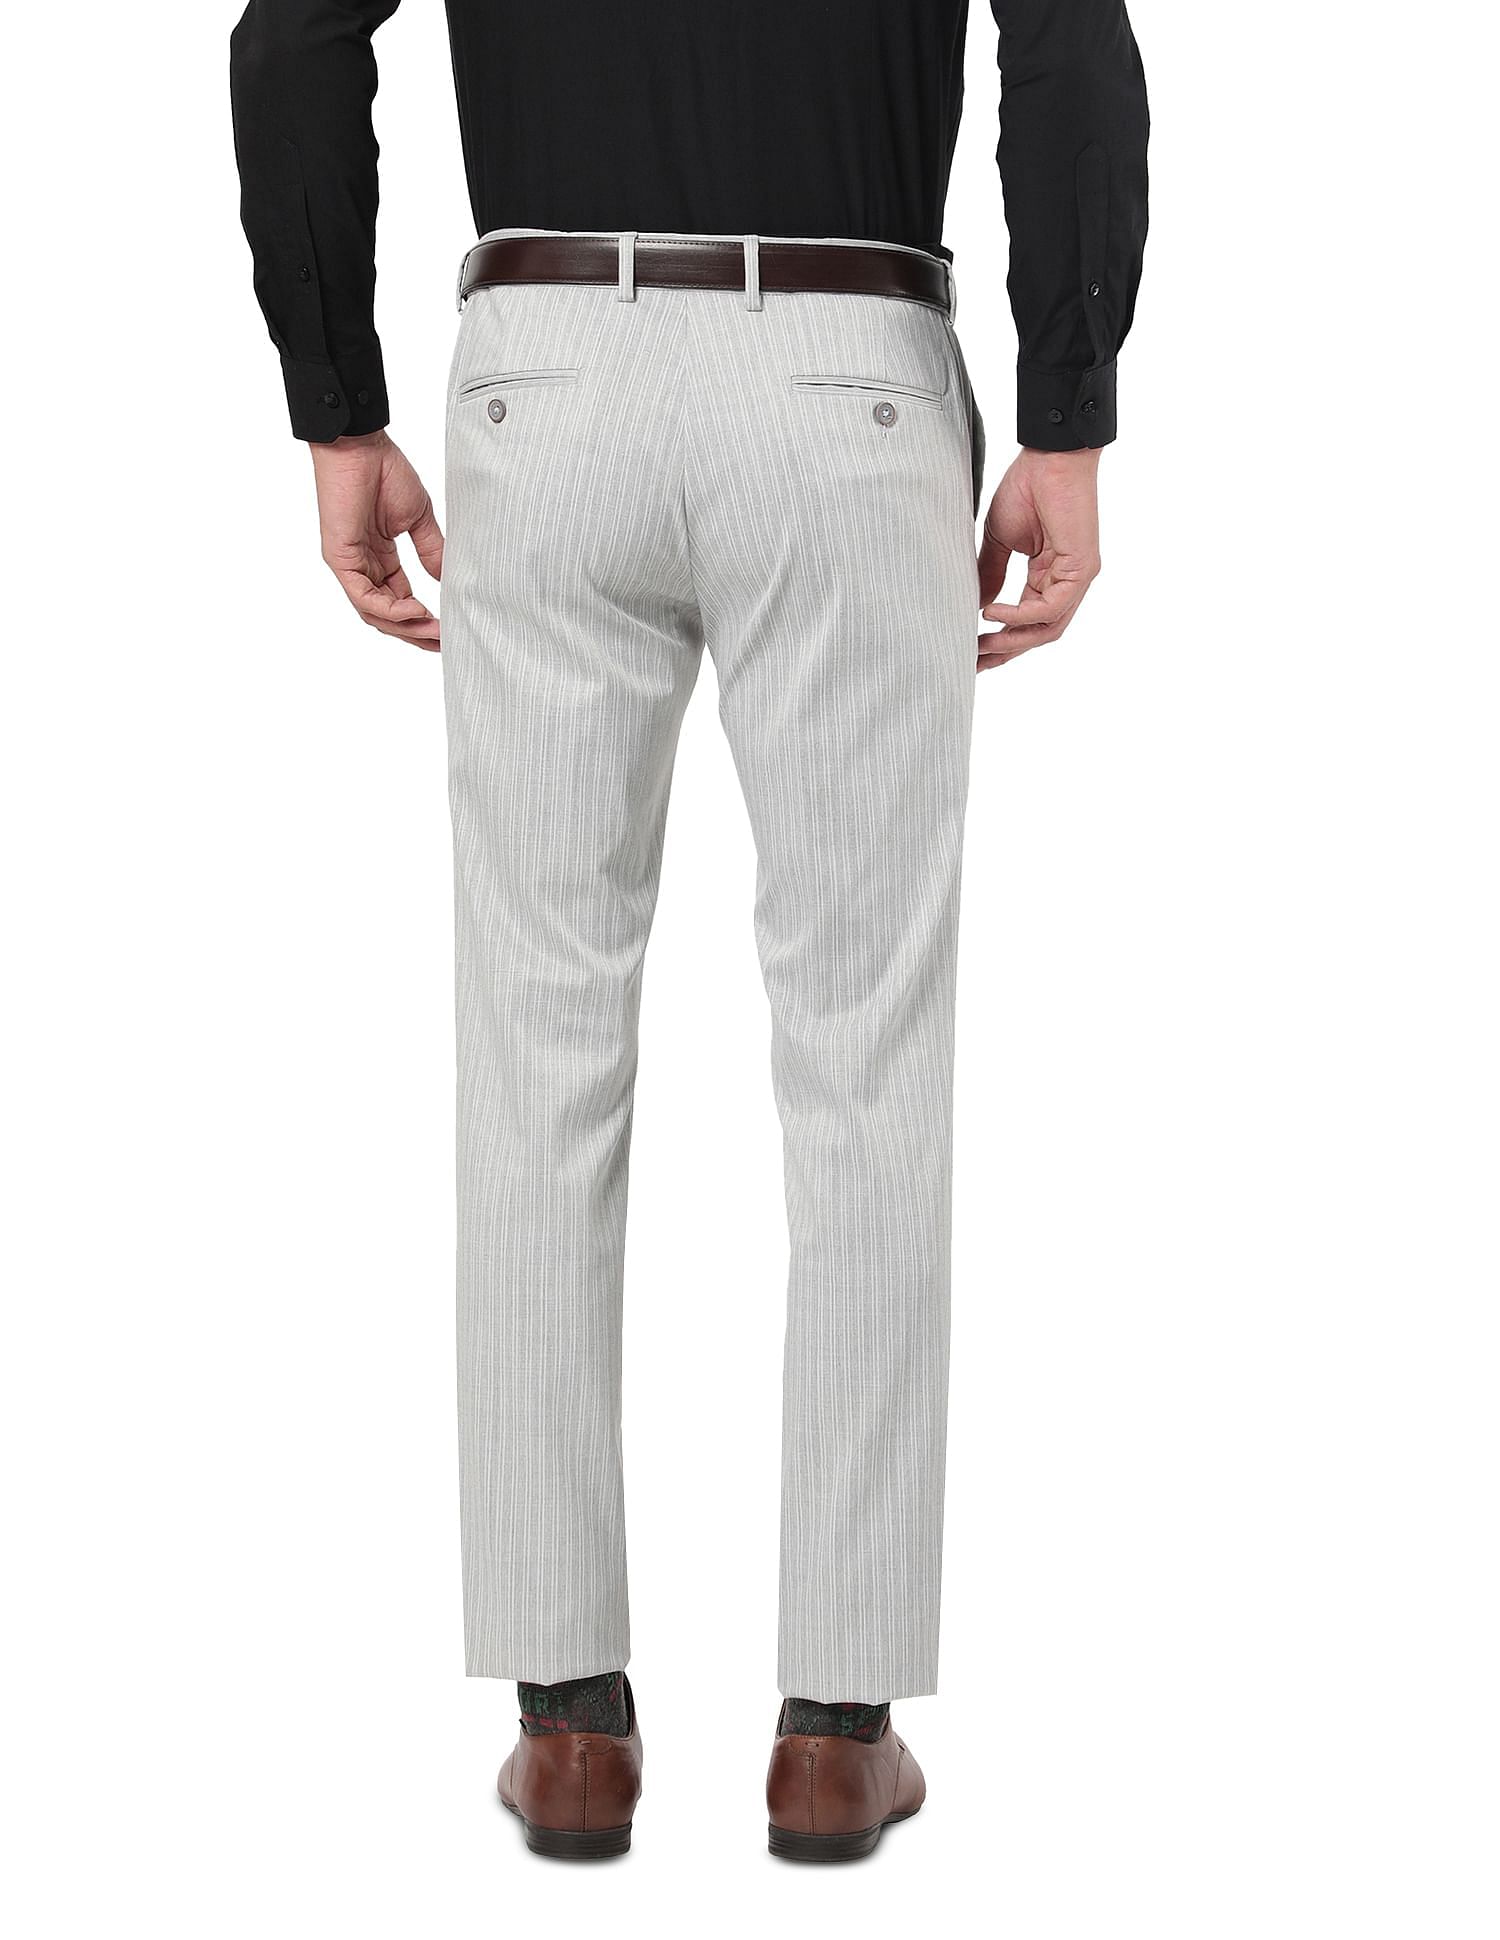 Men Striped Tapered Dress Pants Formal Office Business Trousers Slim Fit  Casual | Fruugo KR